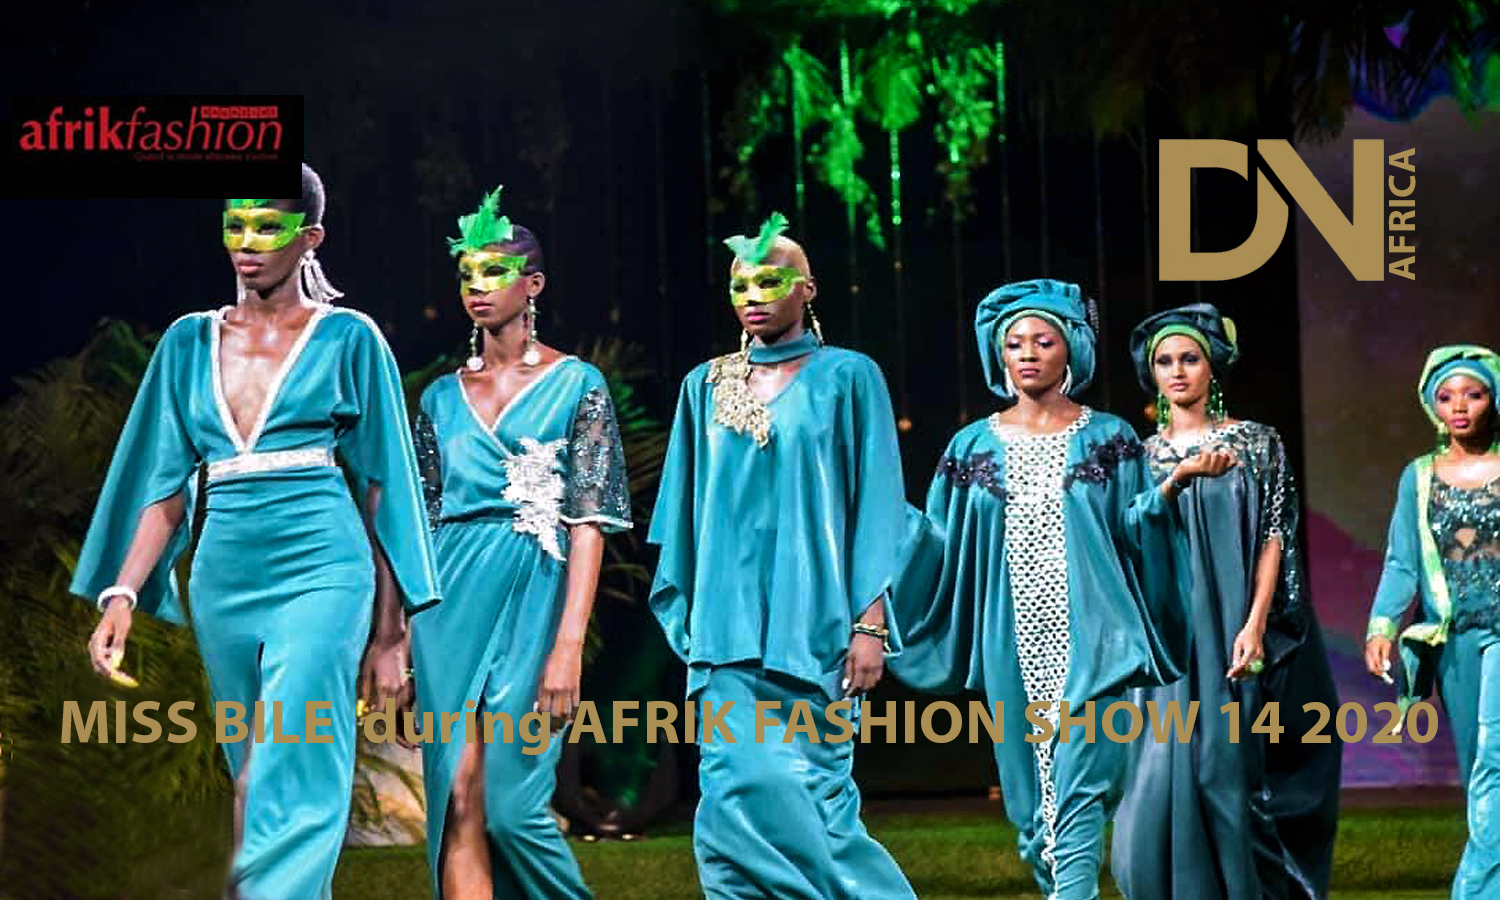 AFRICAN FASHION STYLE MAGAZINE - AFRIK FASHION SHOW 14 BY Isabelle Anoh & AVANT GARDE PRODUCTION -The-socio-professional-integration-of-the-girl - Designer Miss Bile from Ivory Coast - Location Palais des Congres - Sofitel IVOIRE ABIDJAN Ivory Coast - Photographer DAN NGU - Media Partner DN AFRICA - STUDIO 24 NIGERIA - STUDIO 24 INTERNATIONAL - Ifeanyi Christopher Oputa MD AND CEO OF COLVI LIMITED AND STUDIO 24 - Nahomie NOOR COULIBALY